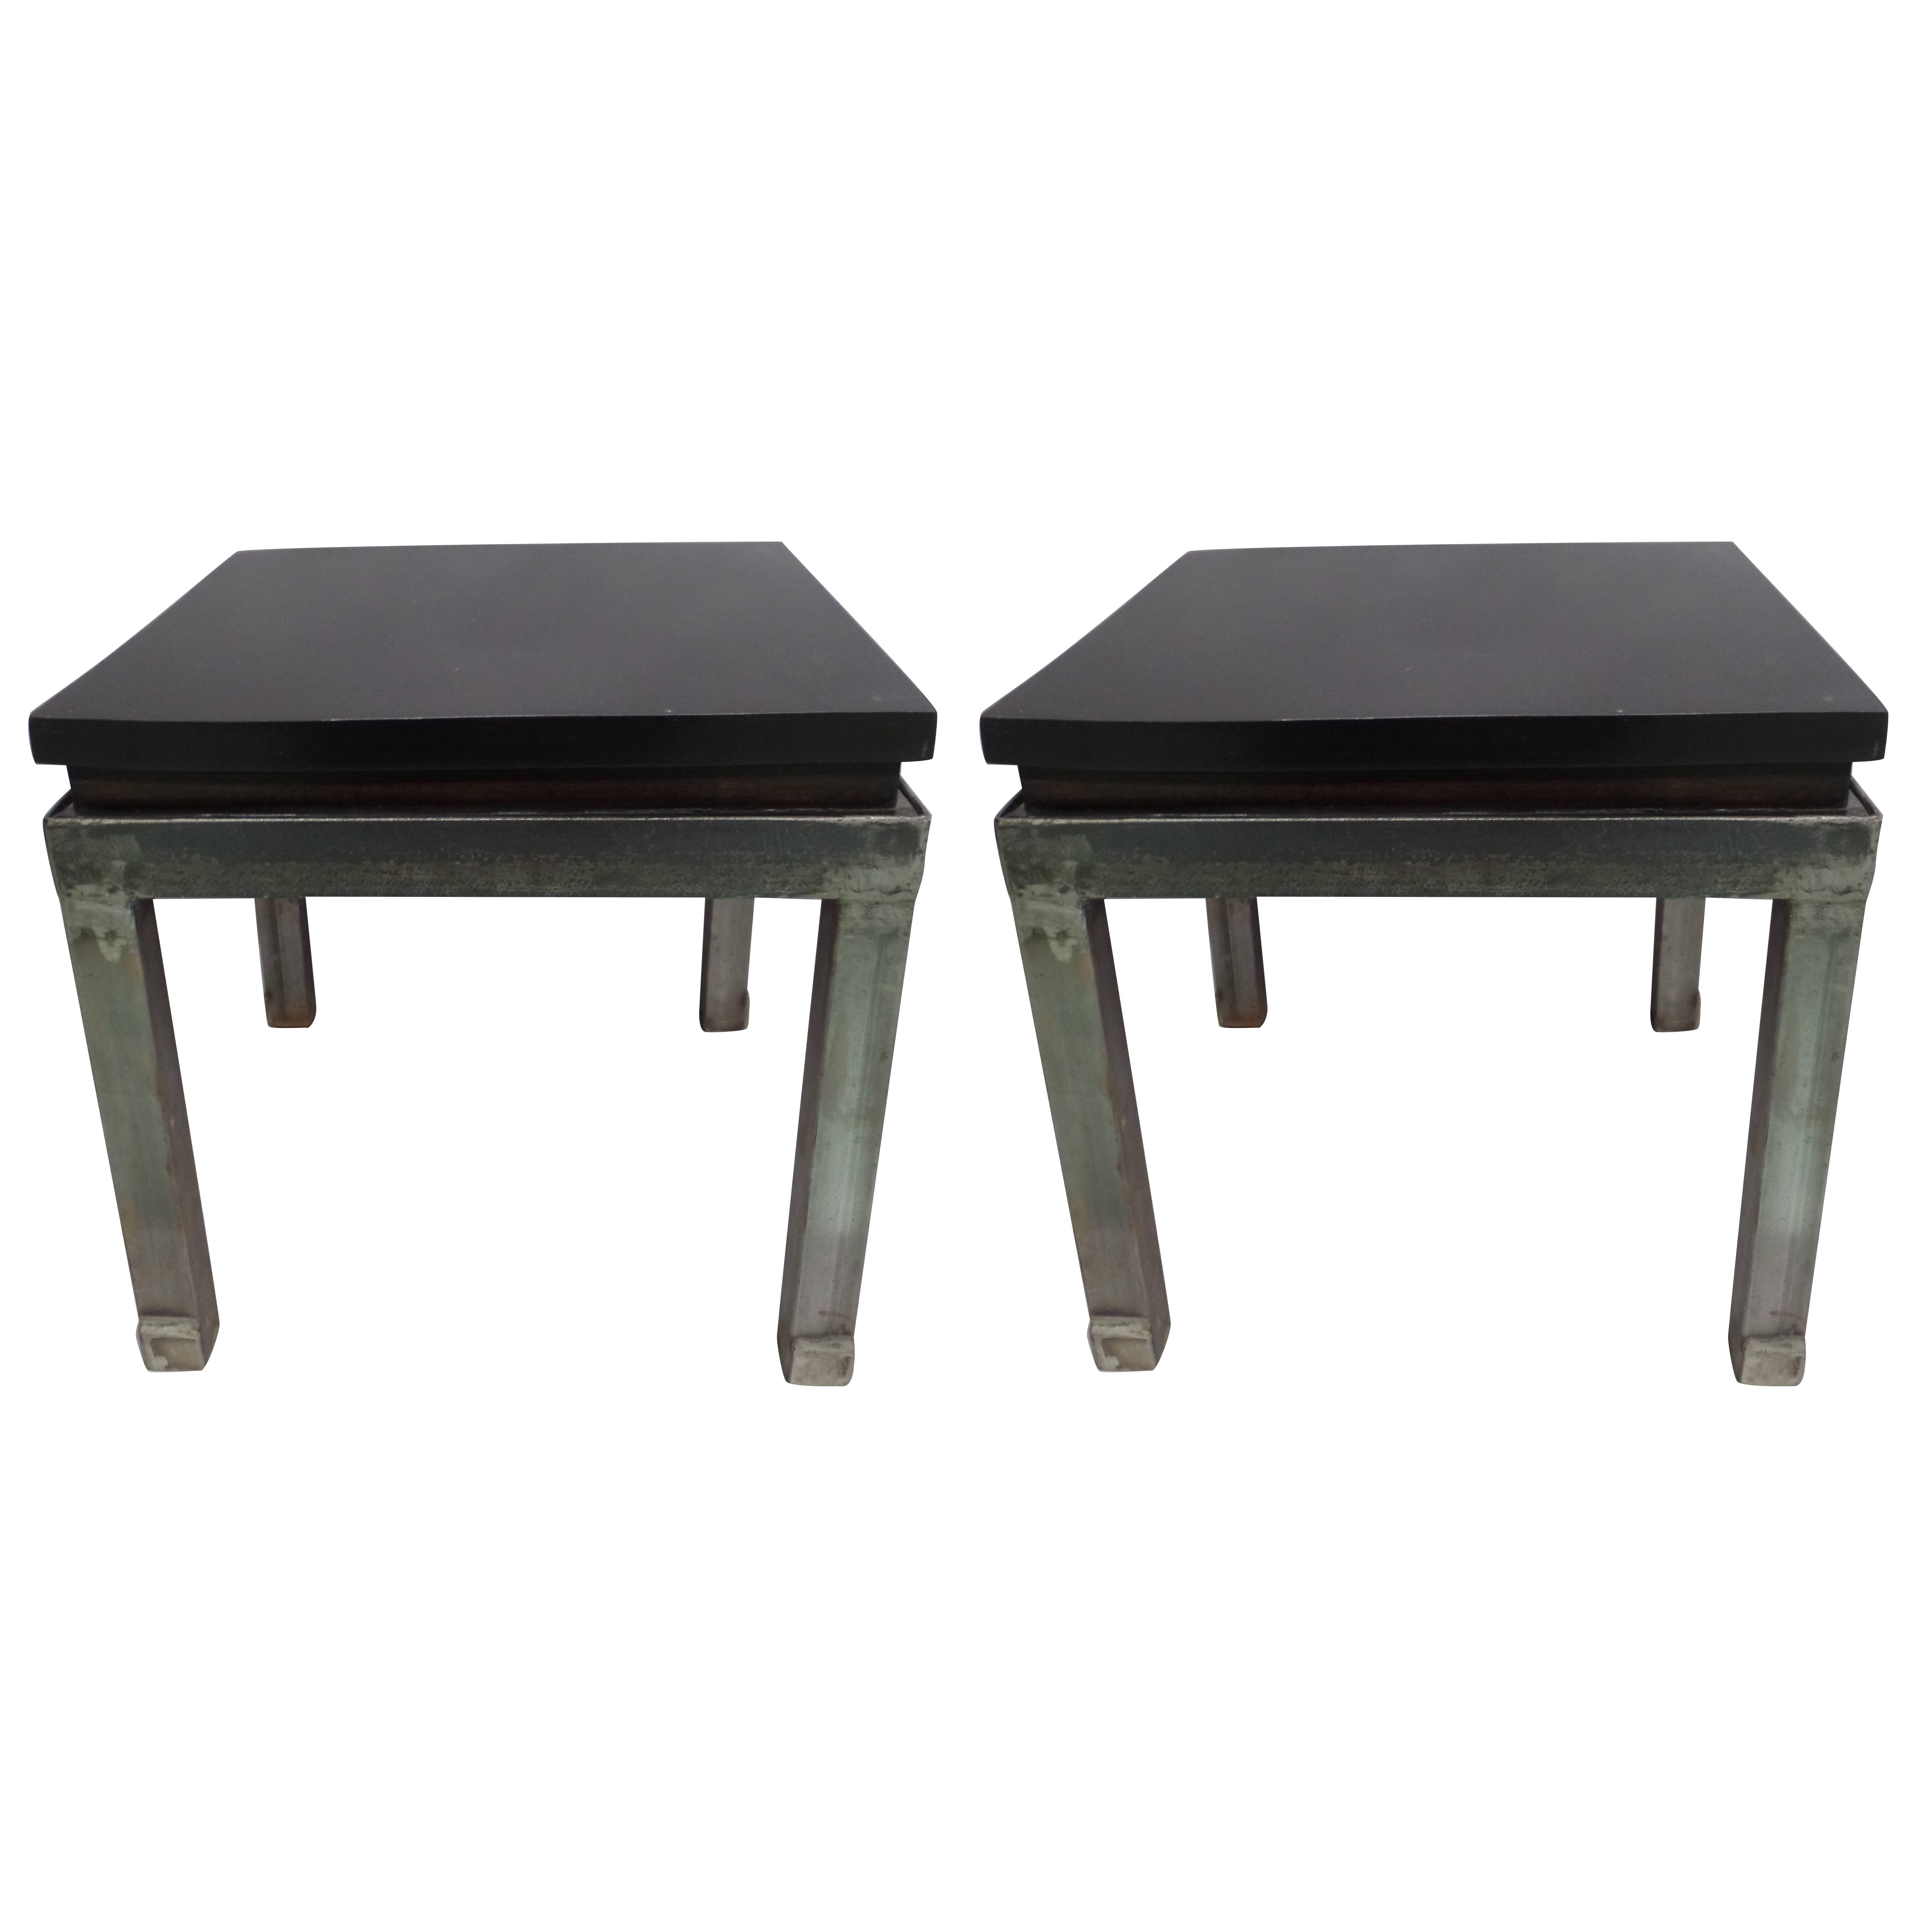 Pair of French Modern Craftsman Steel and Mahogany Benches or Side Tables, 1930 For Sale